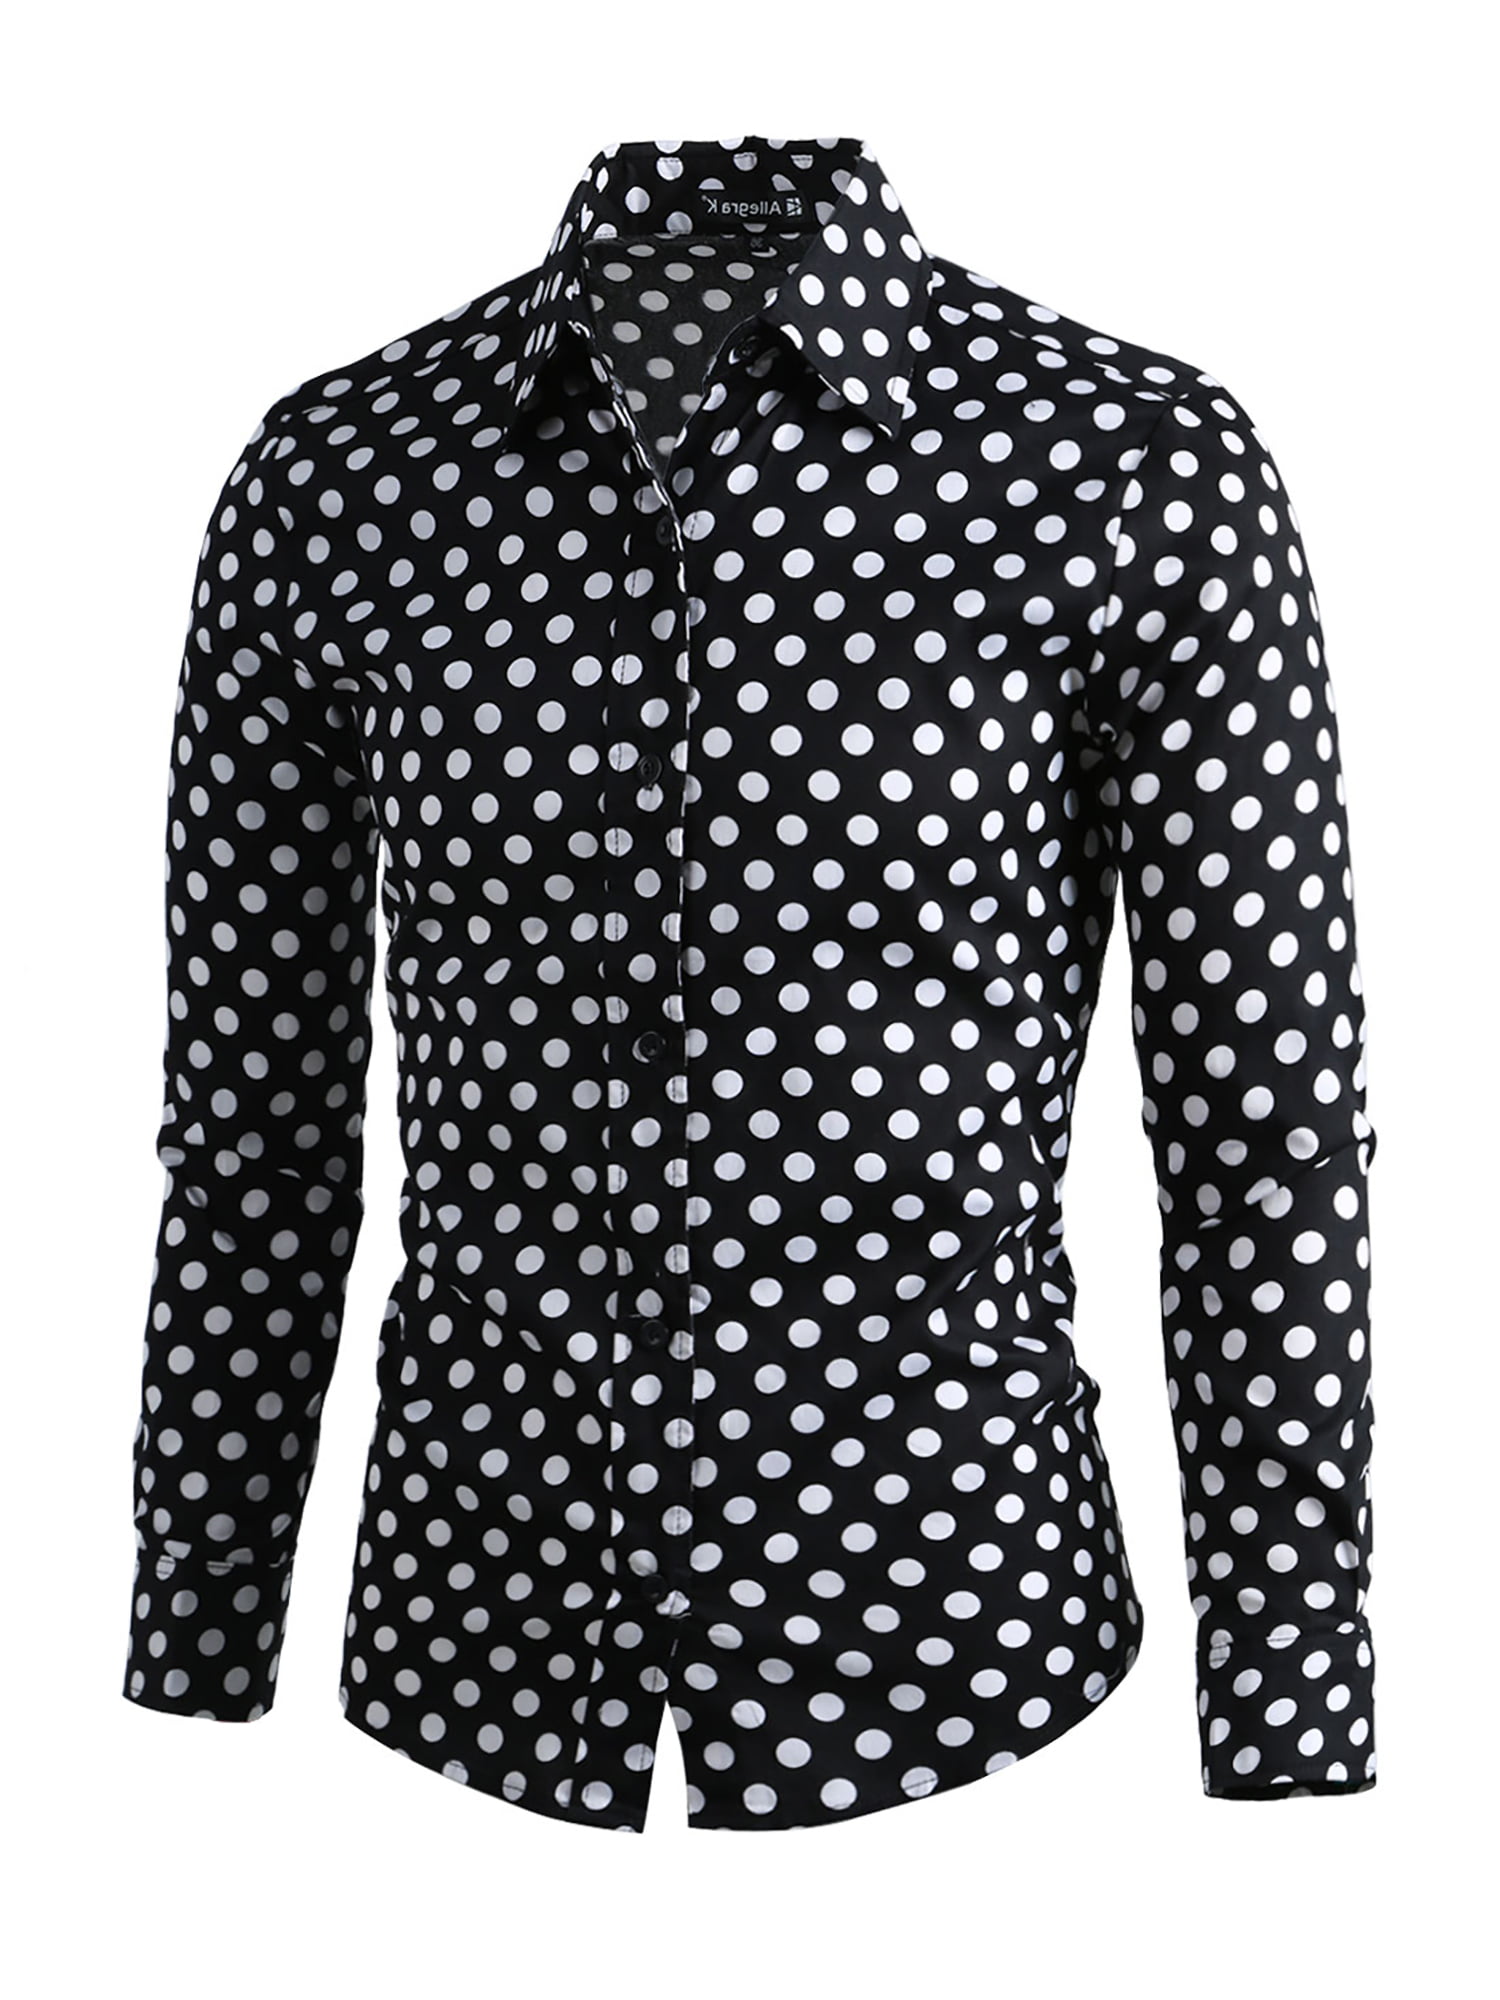 Men Long Sleeve Button Down Dots Casual Black White Fitted Business ...